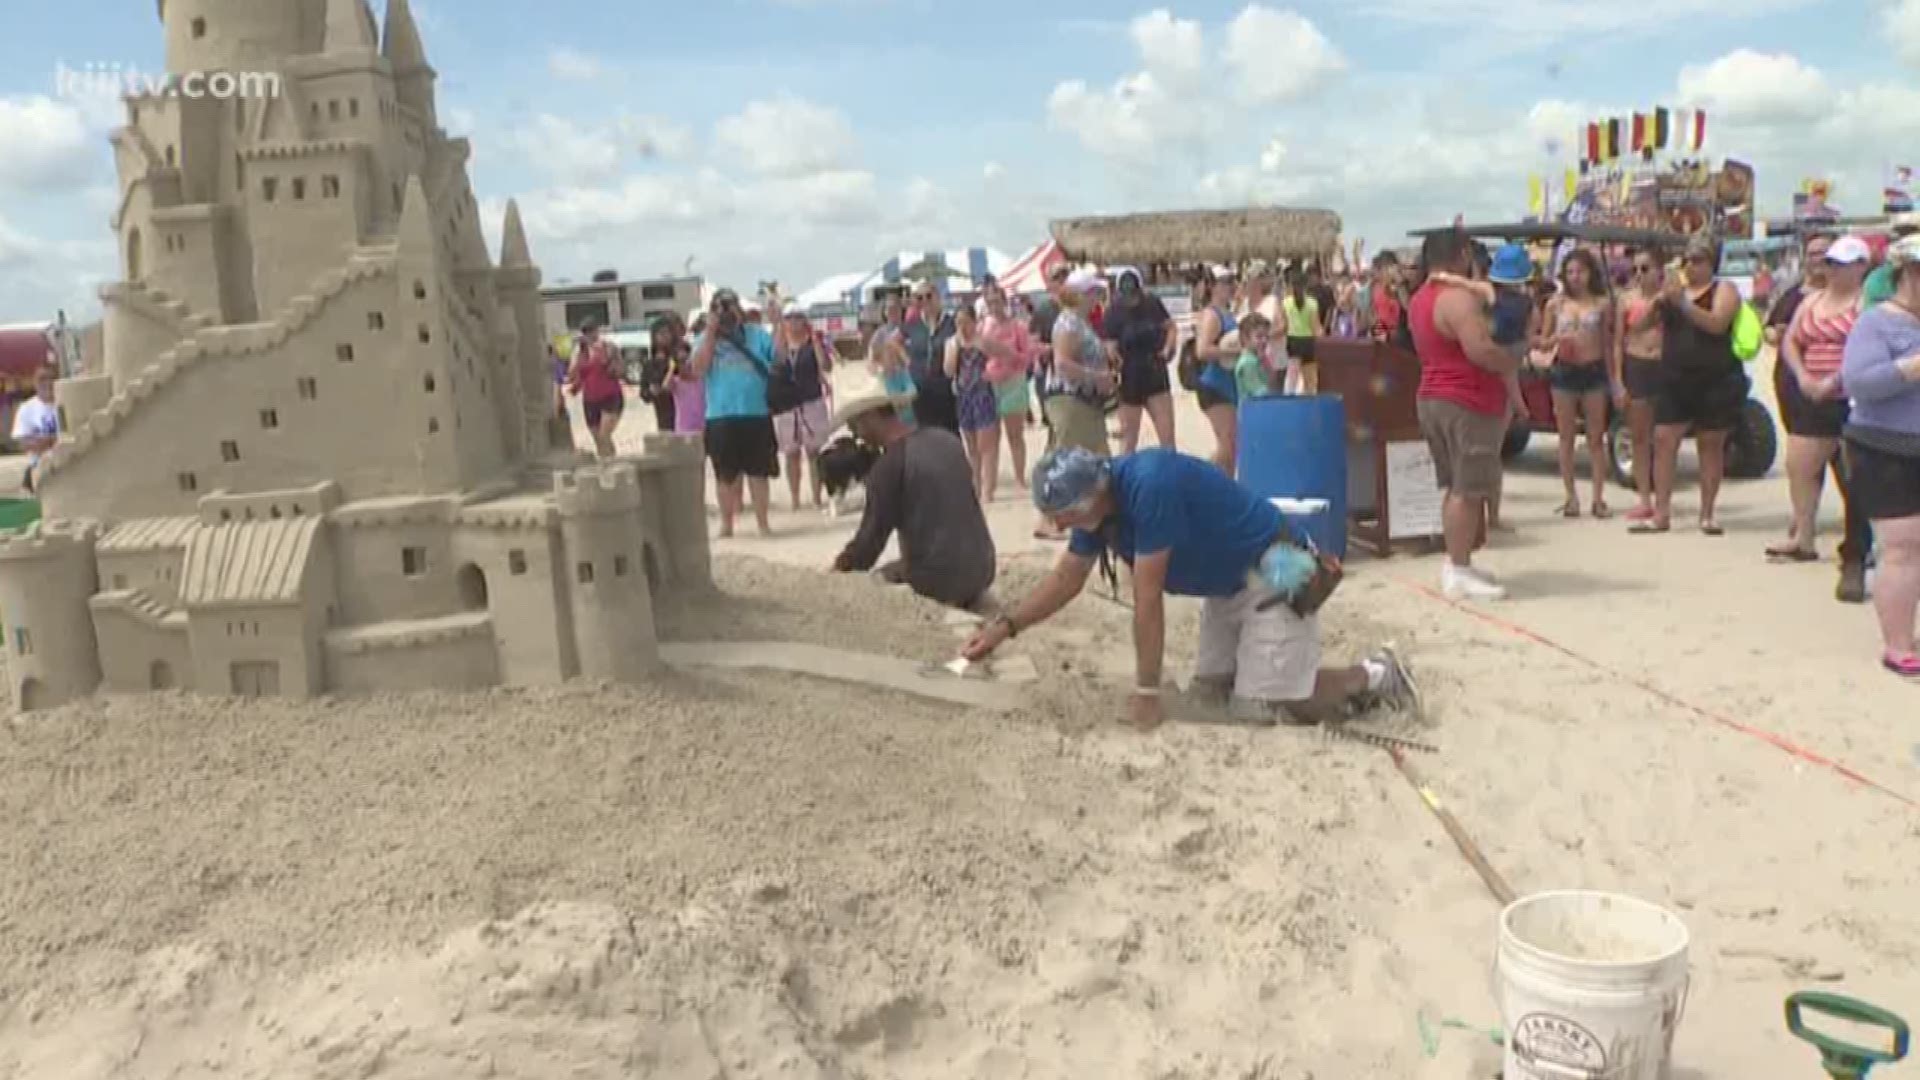 Sandfest is almost approaching, and Port Aransas is preparing to receive guests from all over the Coastal Bend.